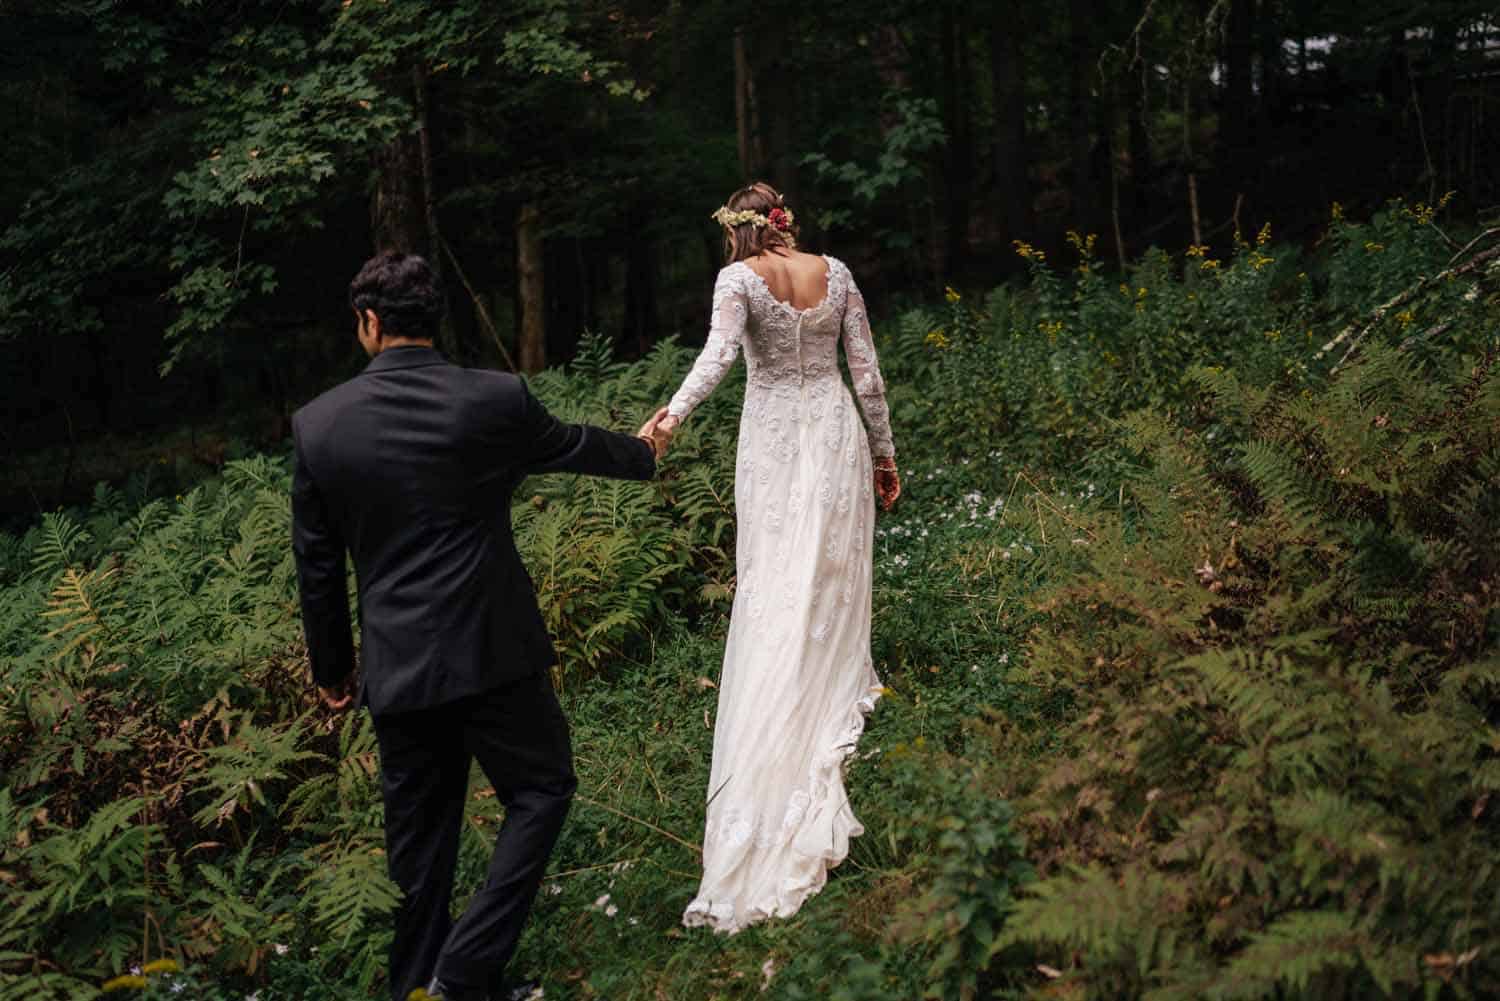 Action: View more details about elopements. Image: A bride in a long lace dress with a short train leads her groom up a slope into the woods by the hand, surrounded by woodland edge plants, with trees ahead.